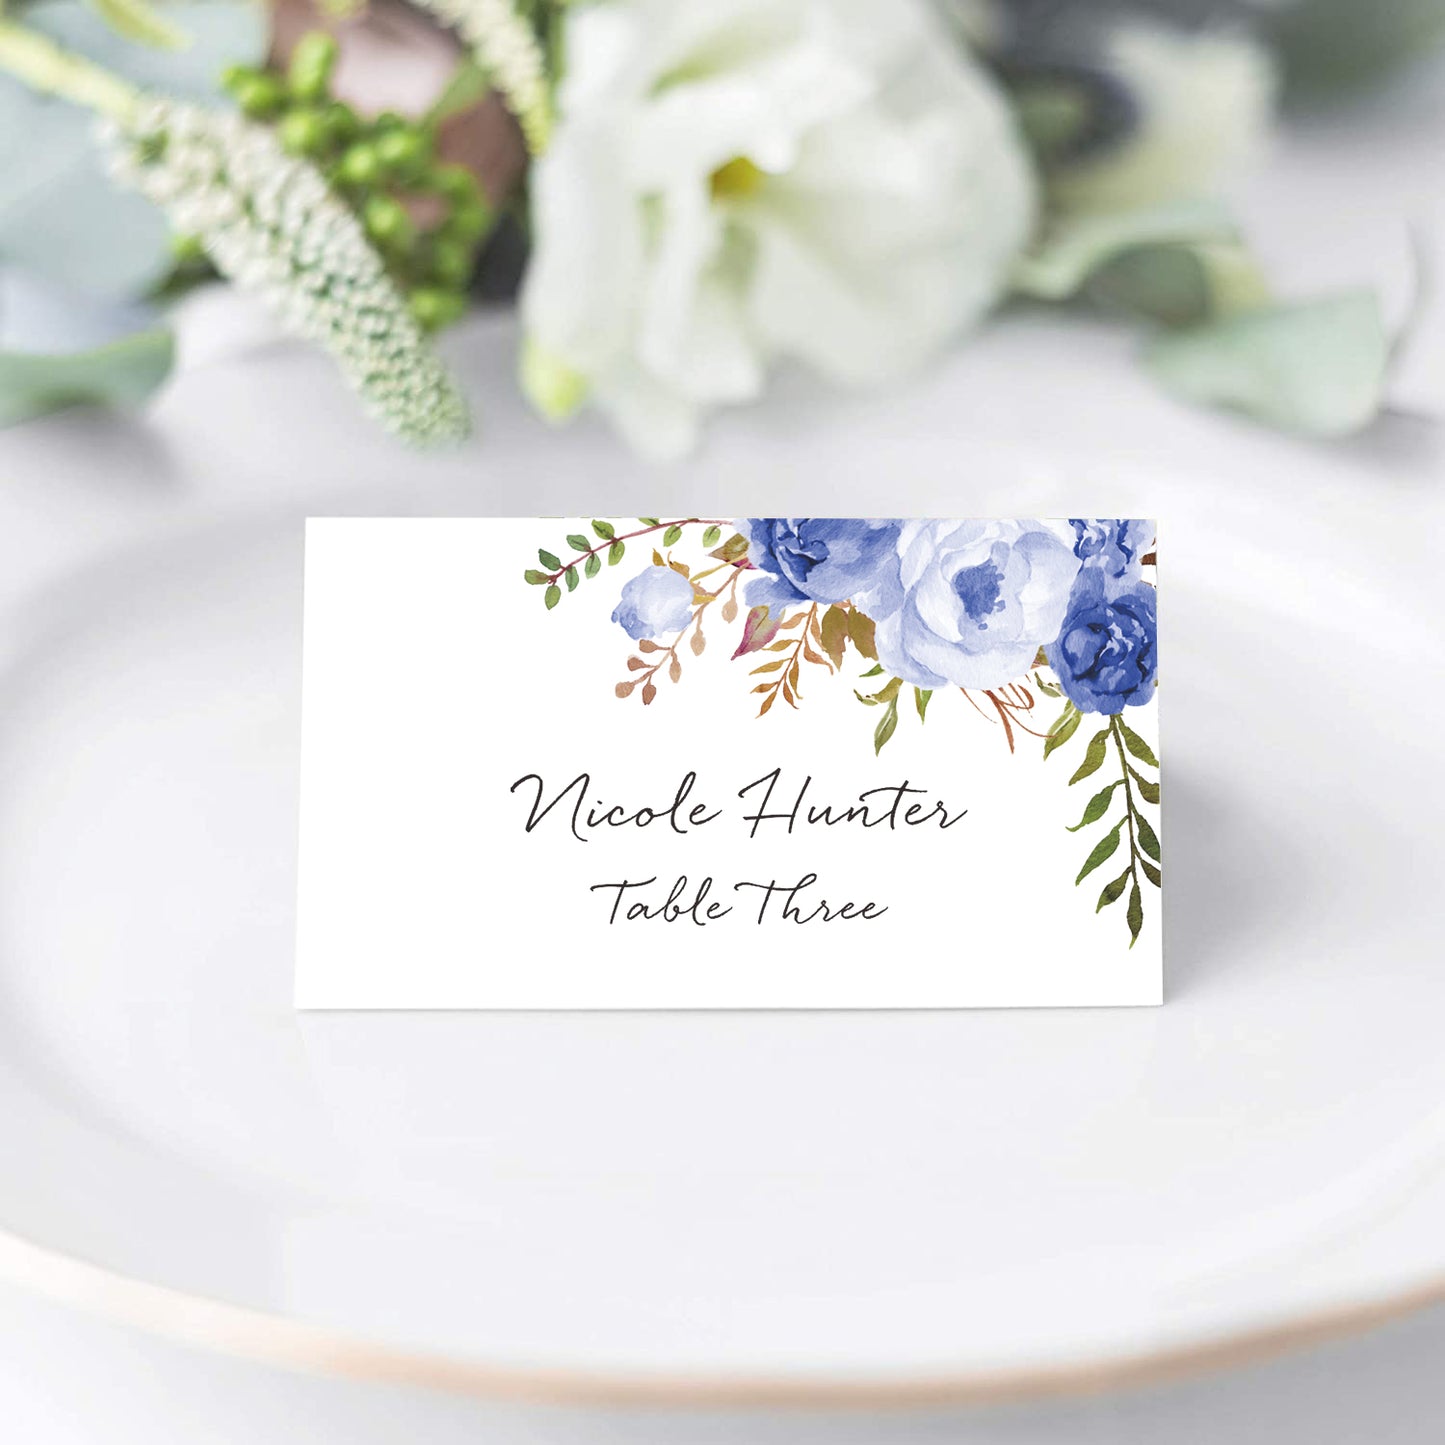 Floral Place Cards for Wedding or Party, Seating Place Cards for Tables, Scored for Easy Folding, Blue Flower Design, 2 x 3.5 Inches